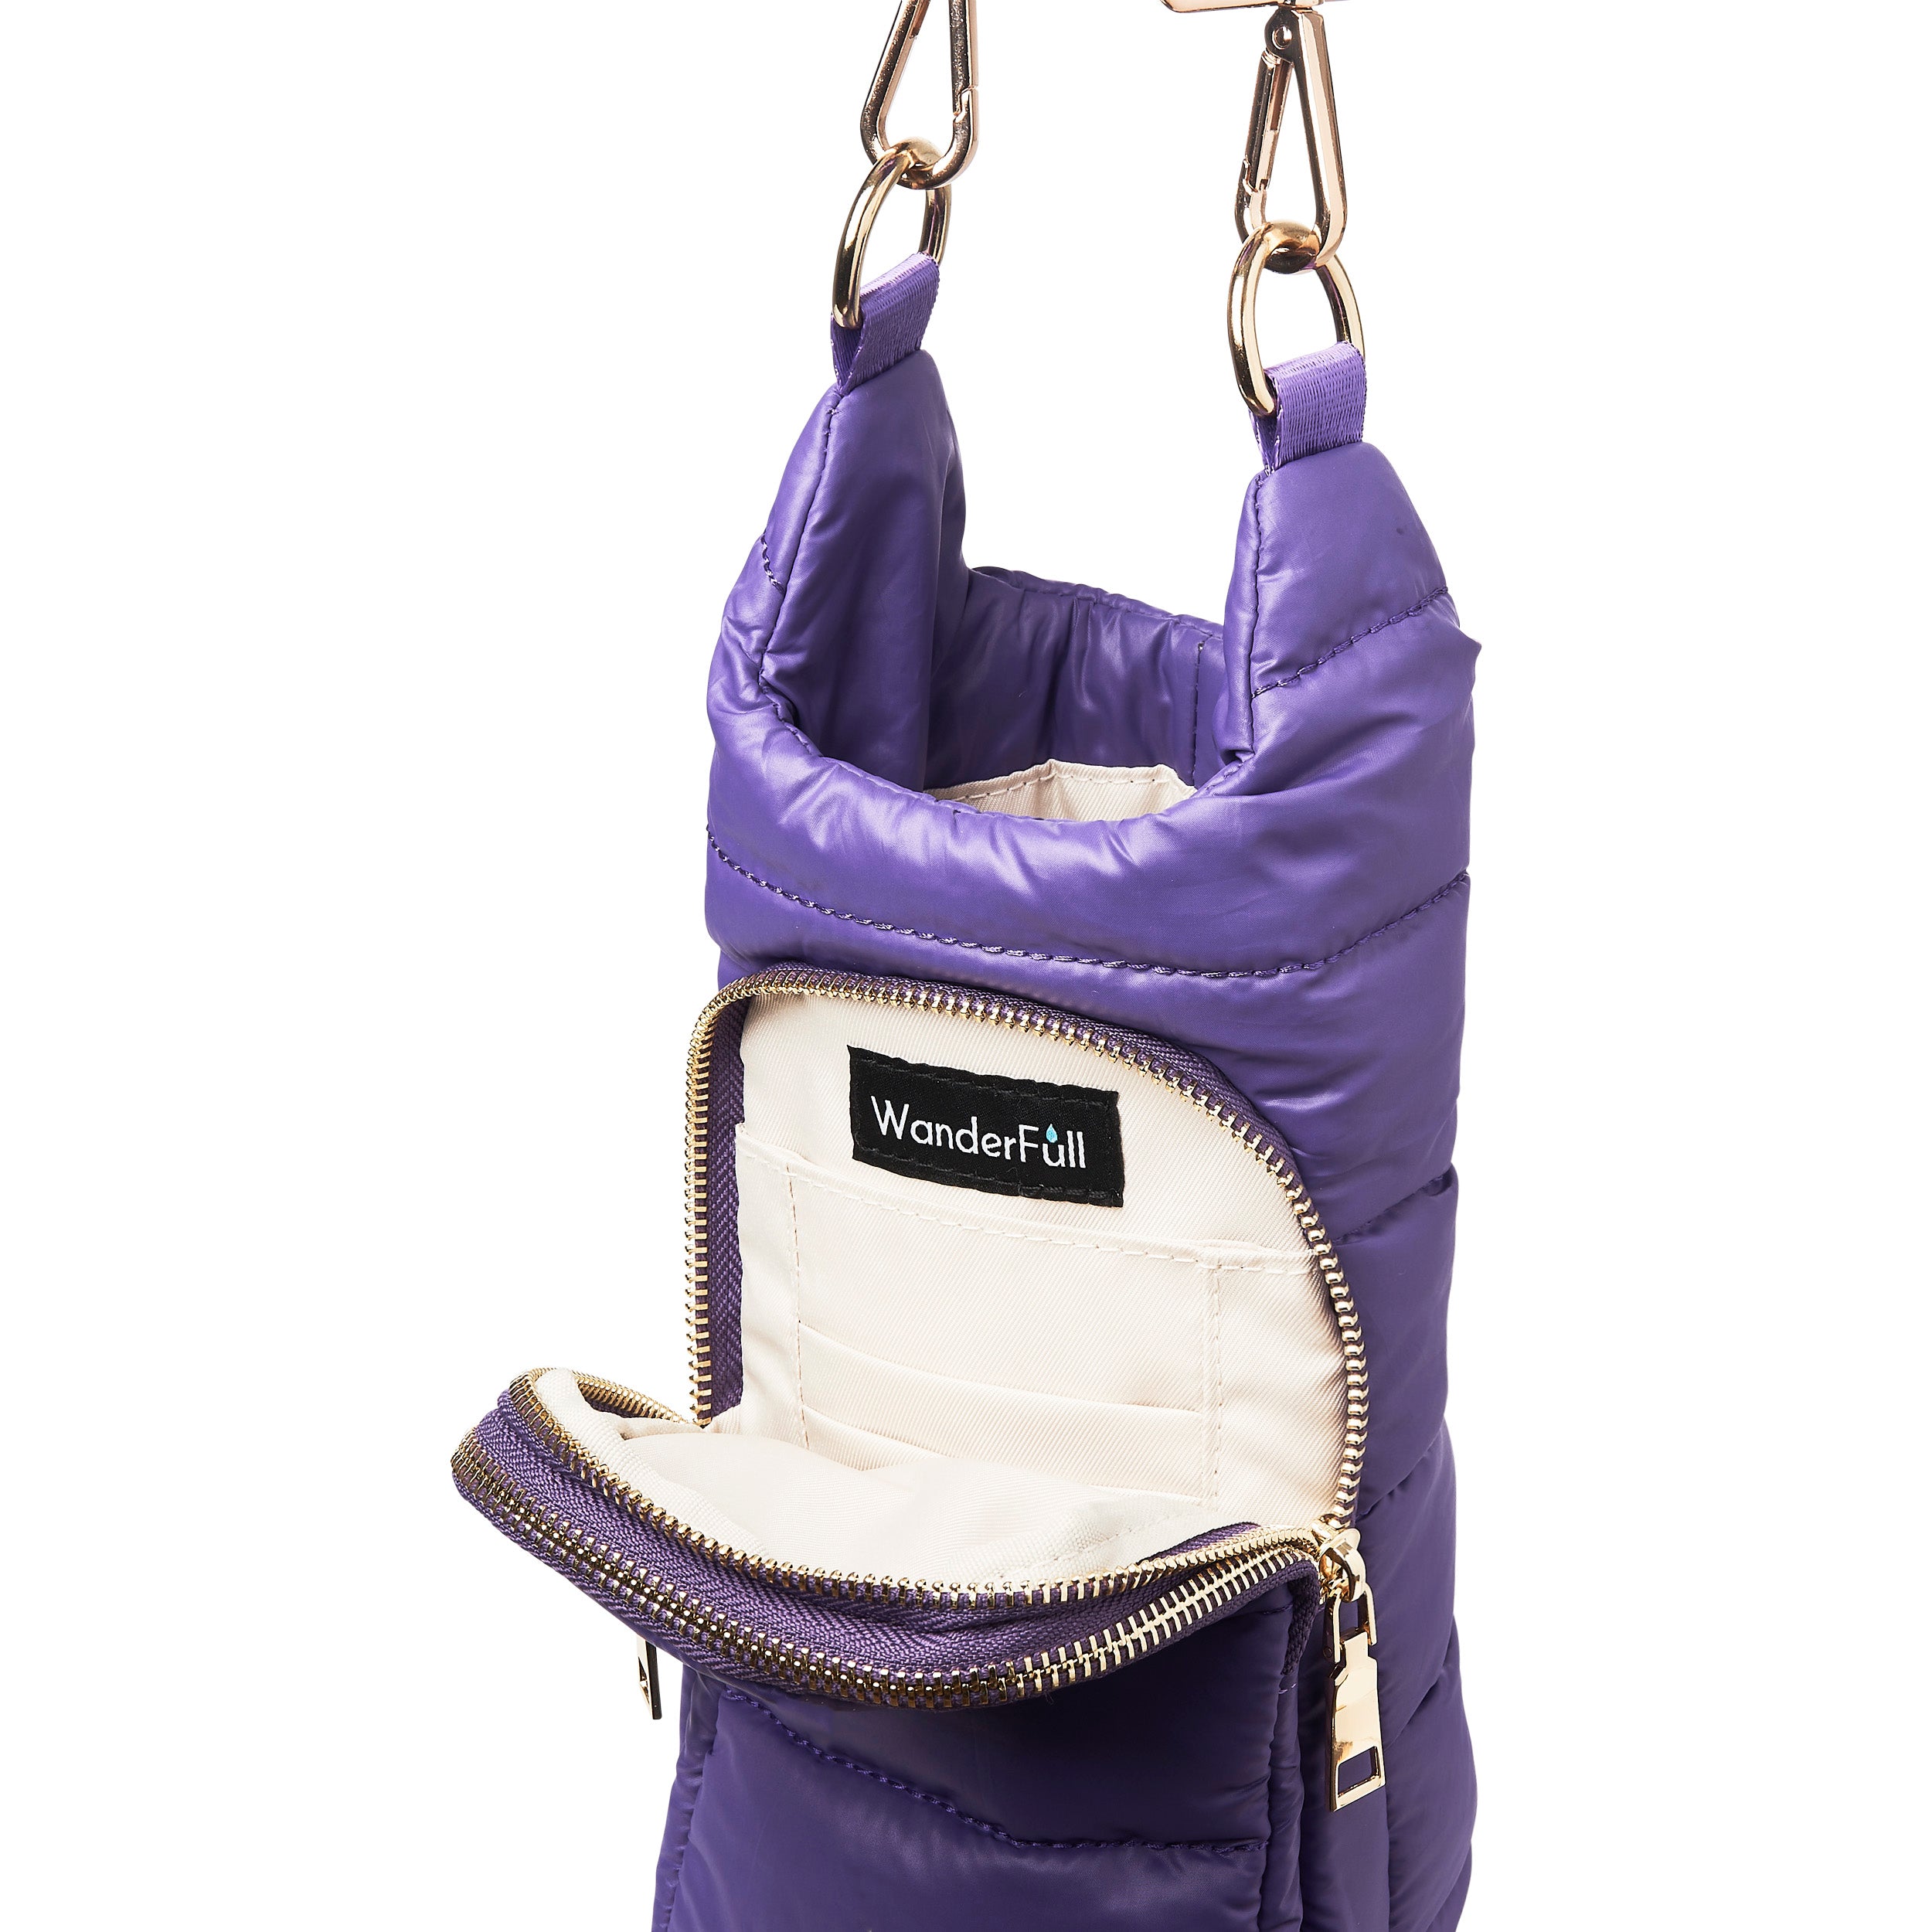 Deep Violet Matte HydroBag with Matching Solid Strap